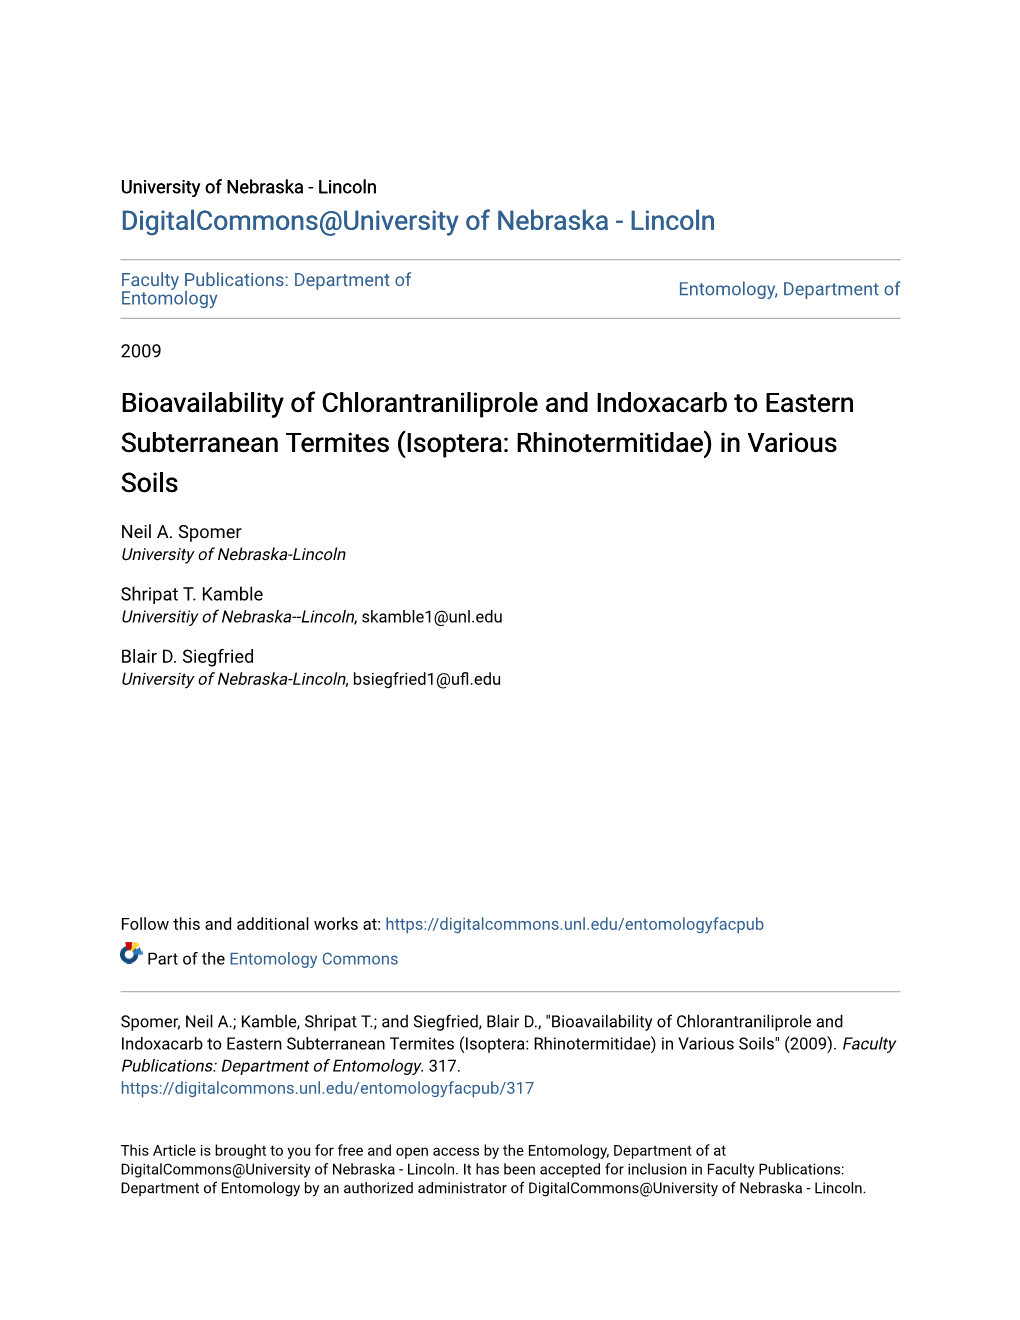 Bioavailability of Chlorantraniliprole and Indoxacarb to Eastern Subterranean Termites (Isoptera: Rhinotermitidae) in Various Soils